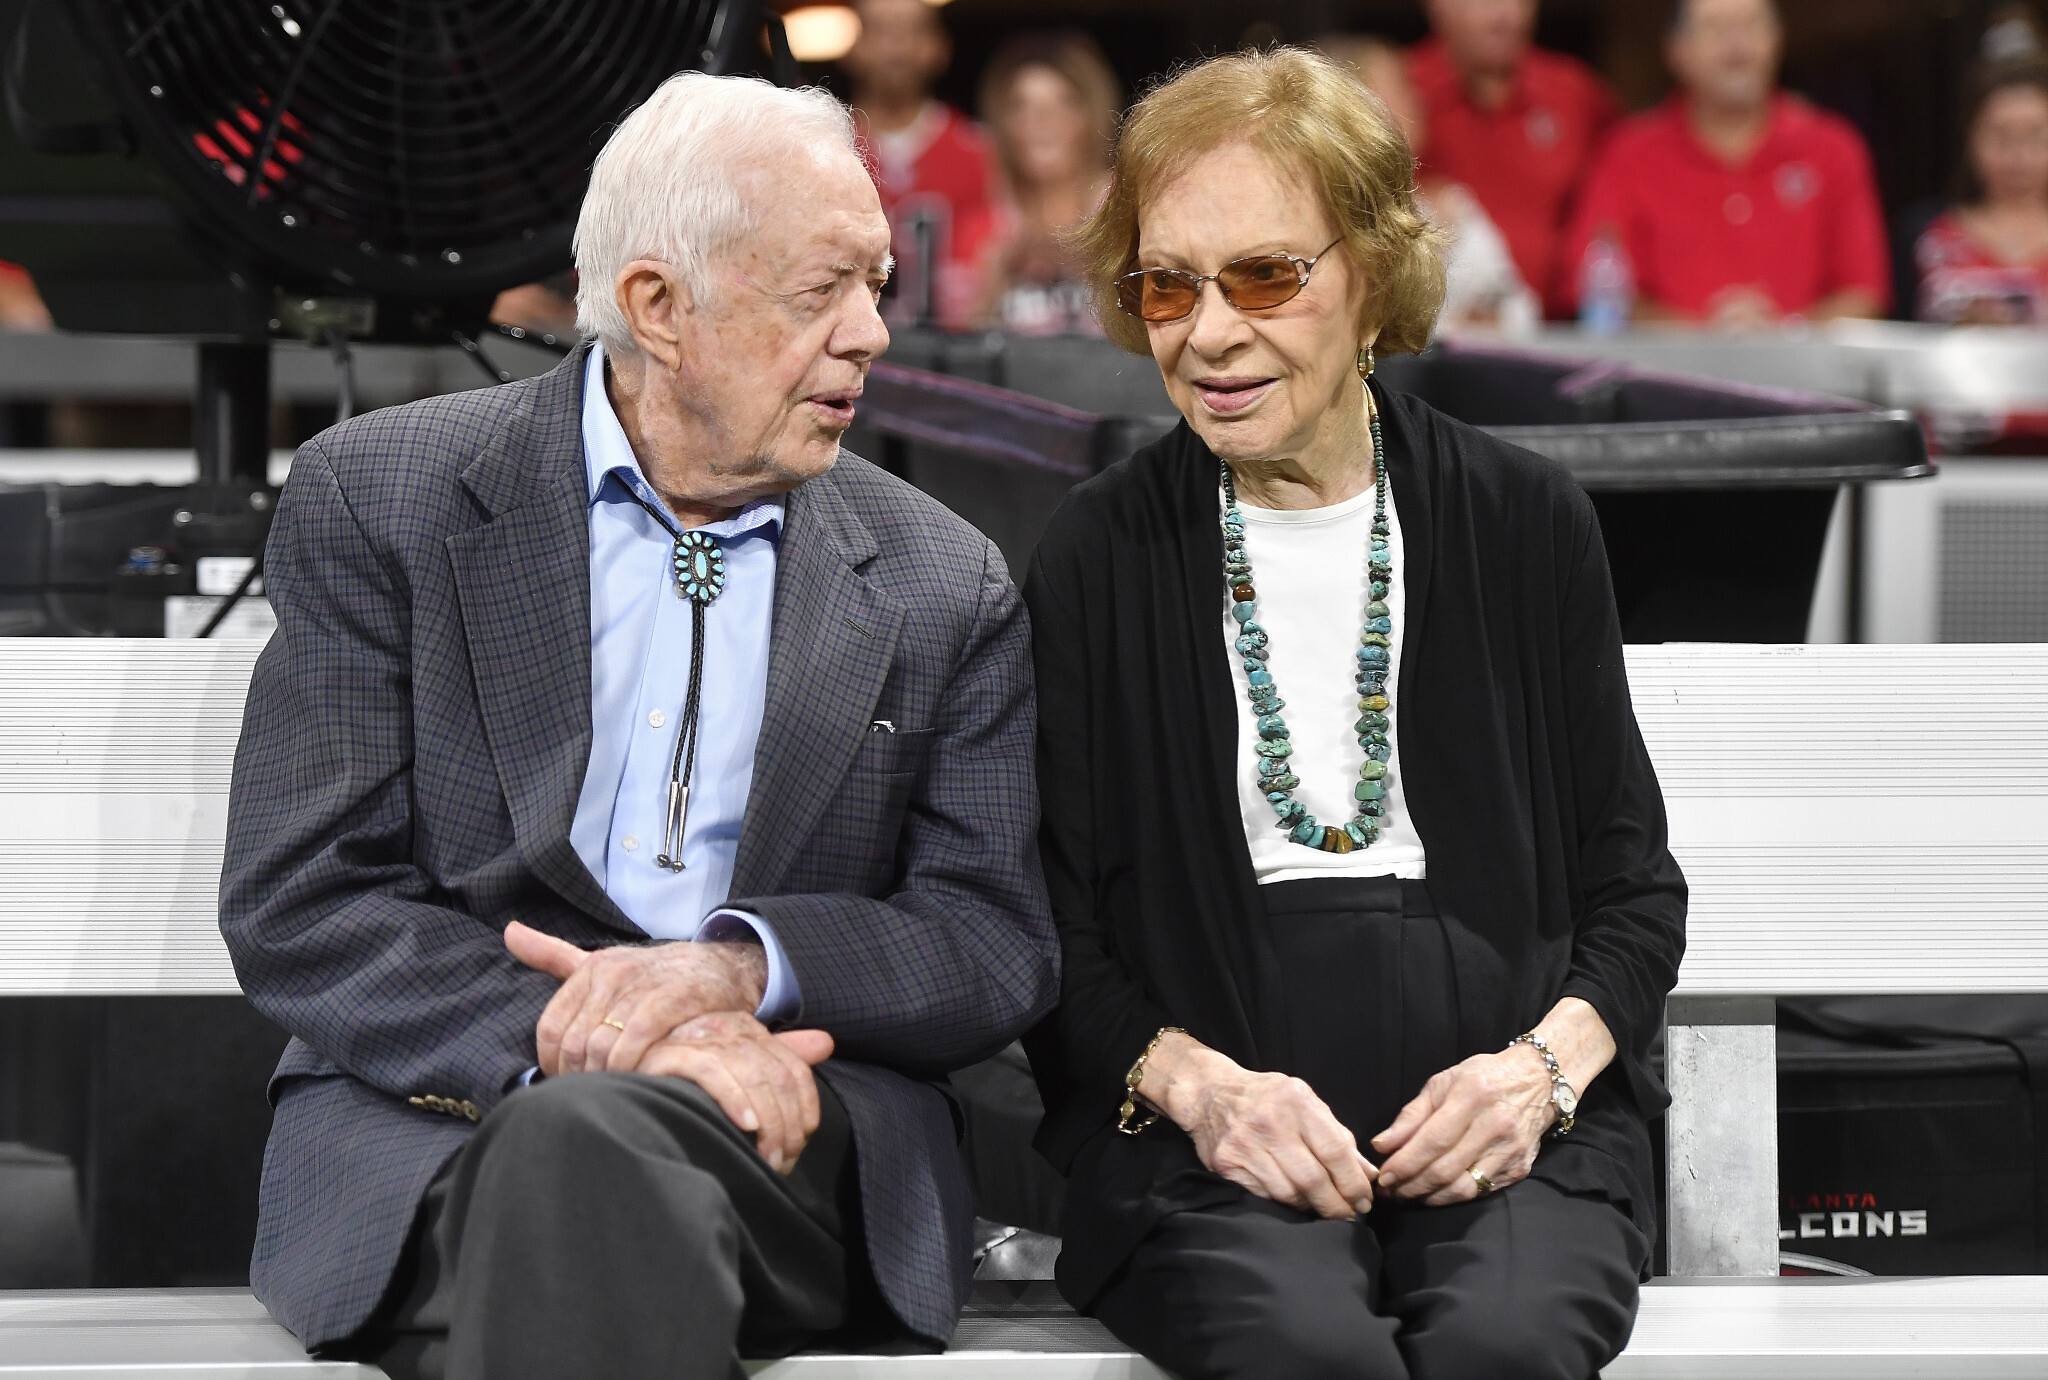 Rosalynn Carter: A Devoted Advocate and Partner